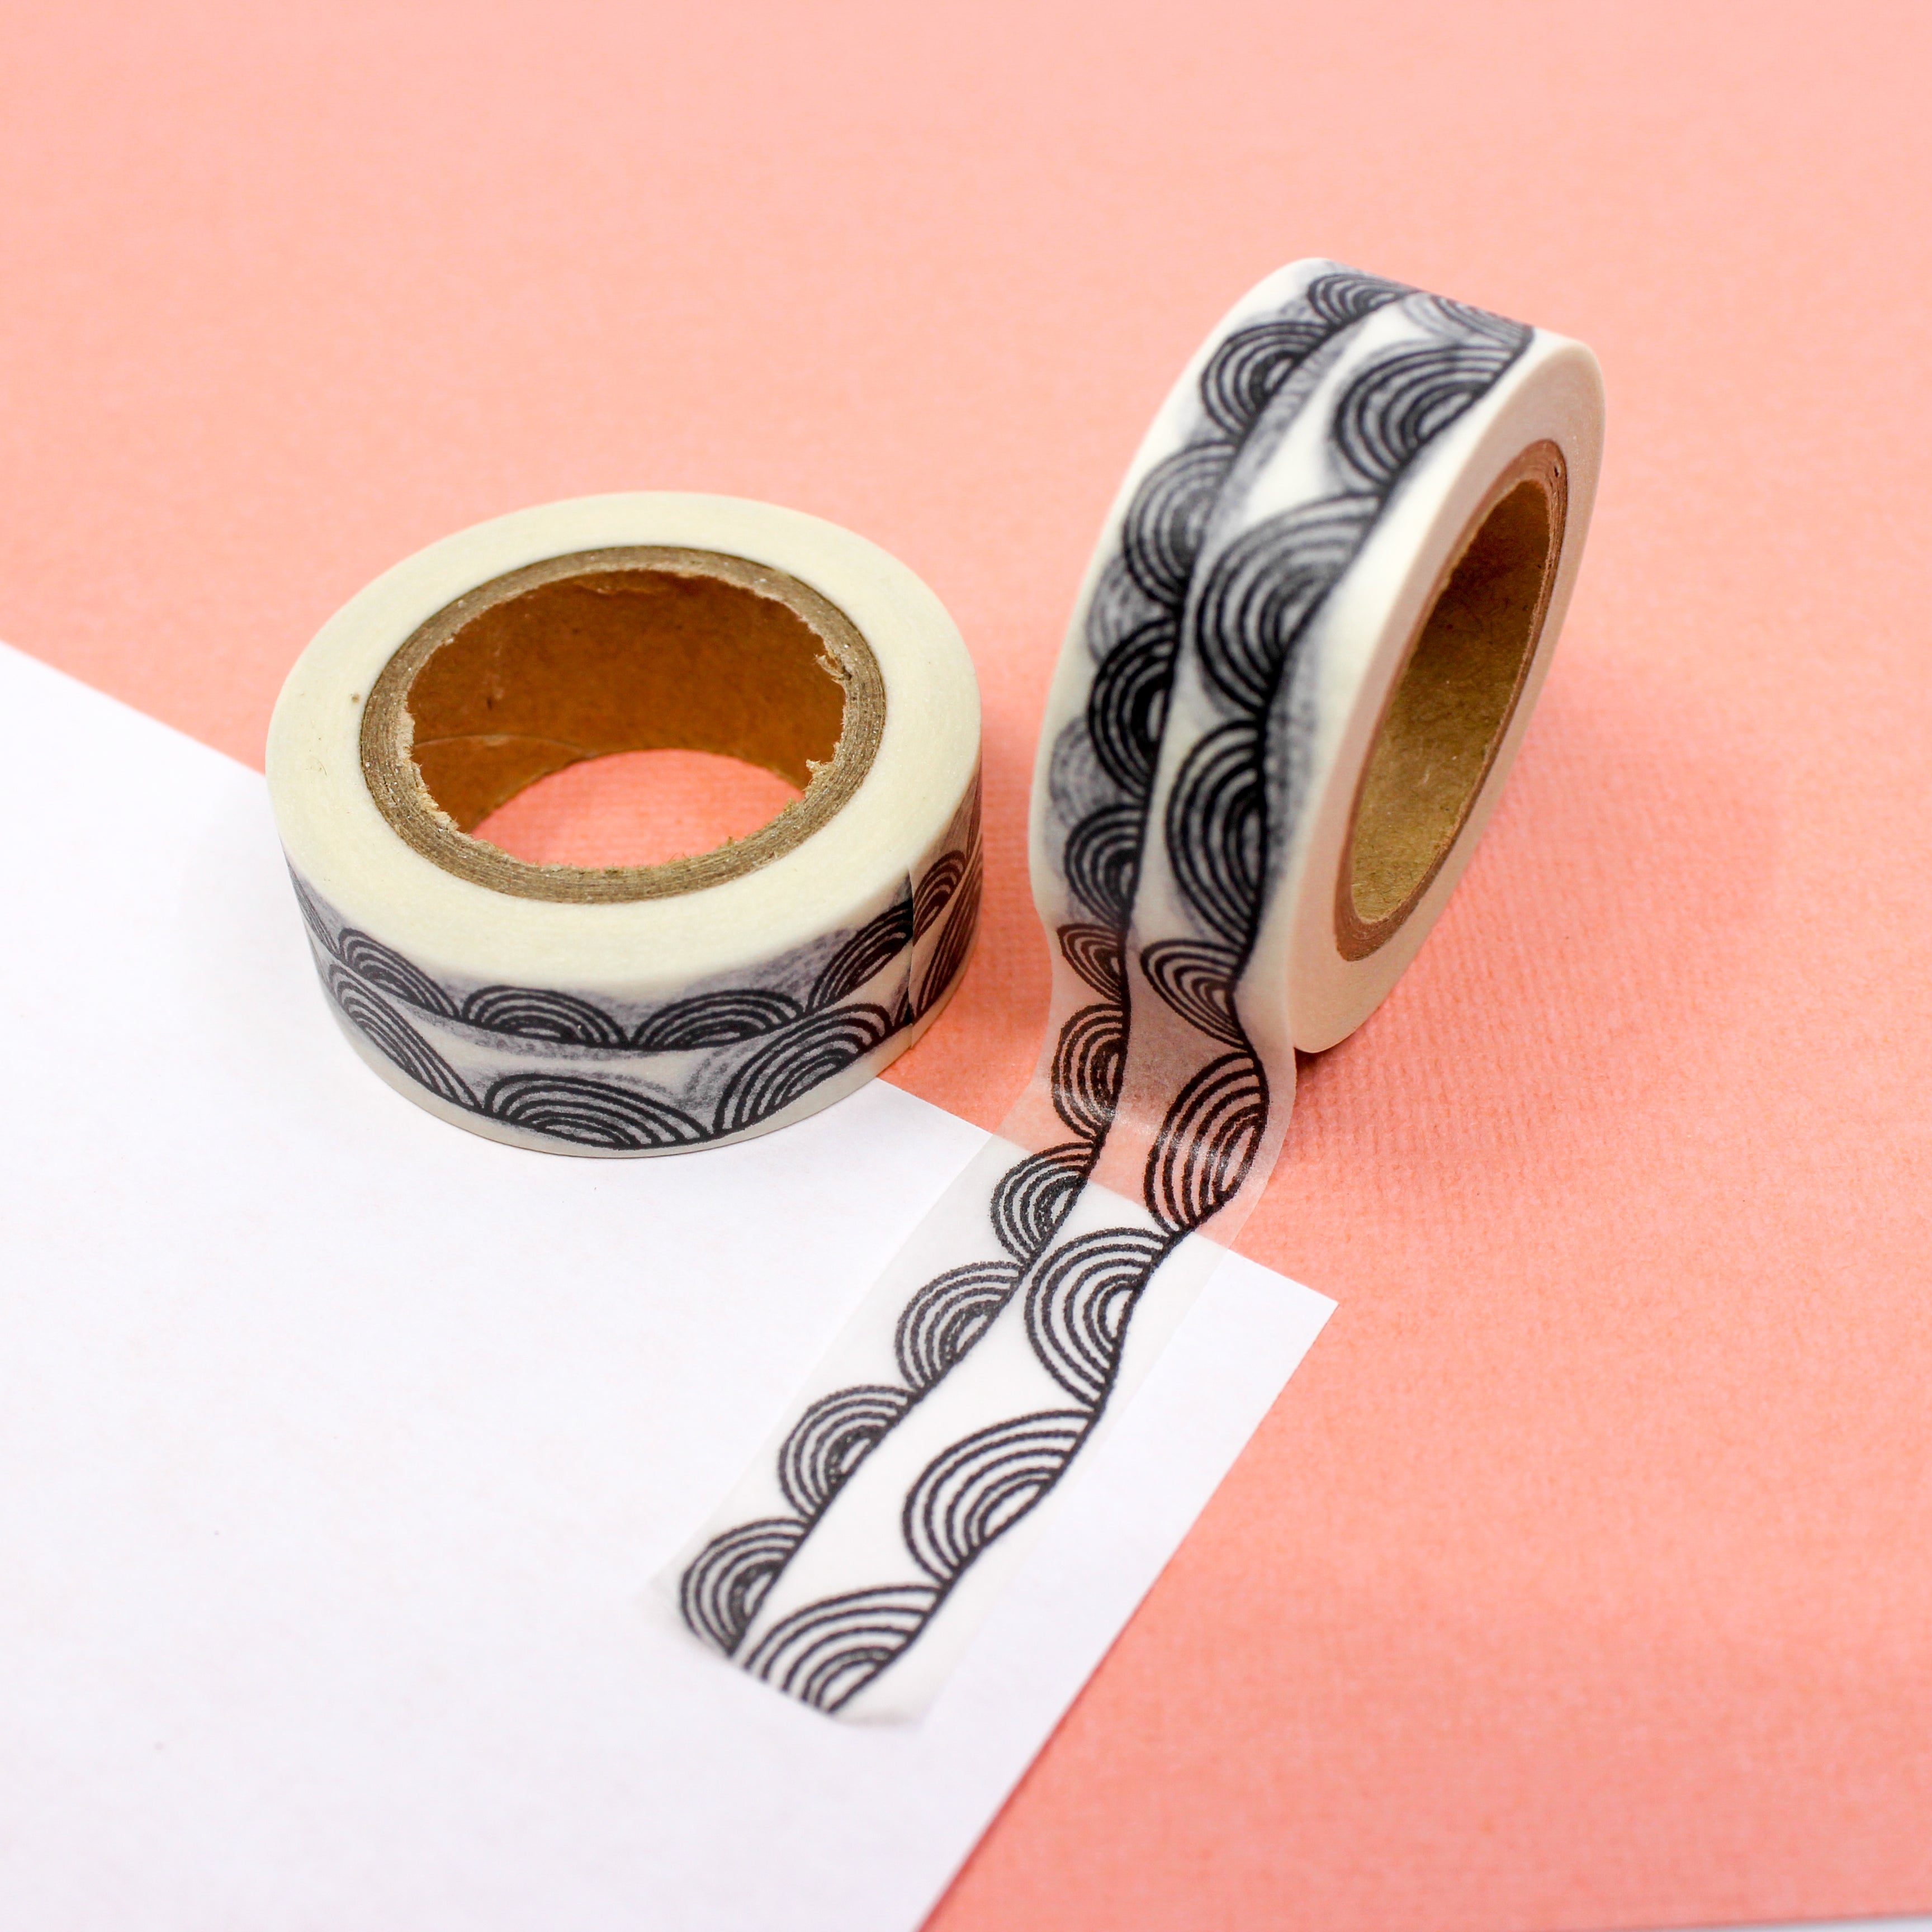 This is a black and white swirly hump border pattern washi tape from BBB Supplies Craft Shop